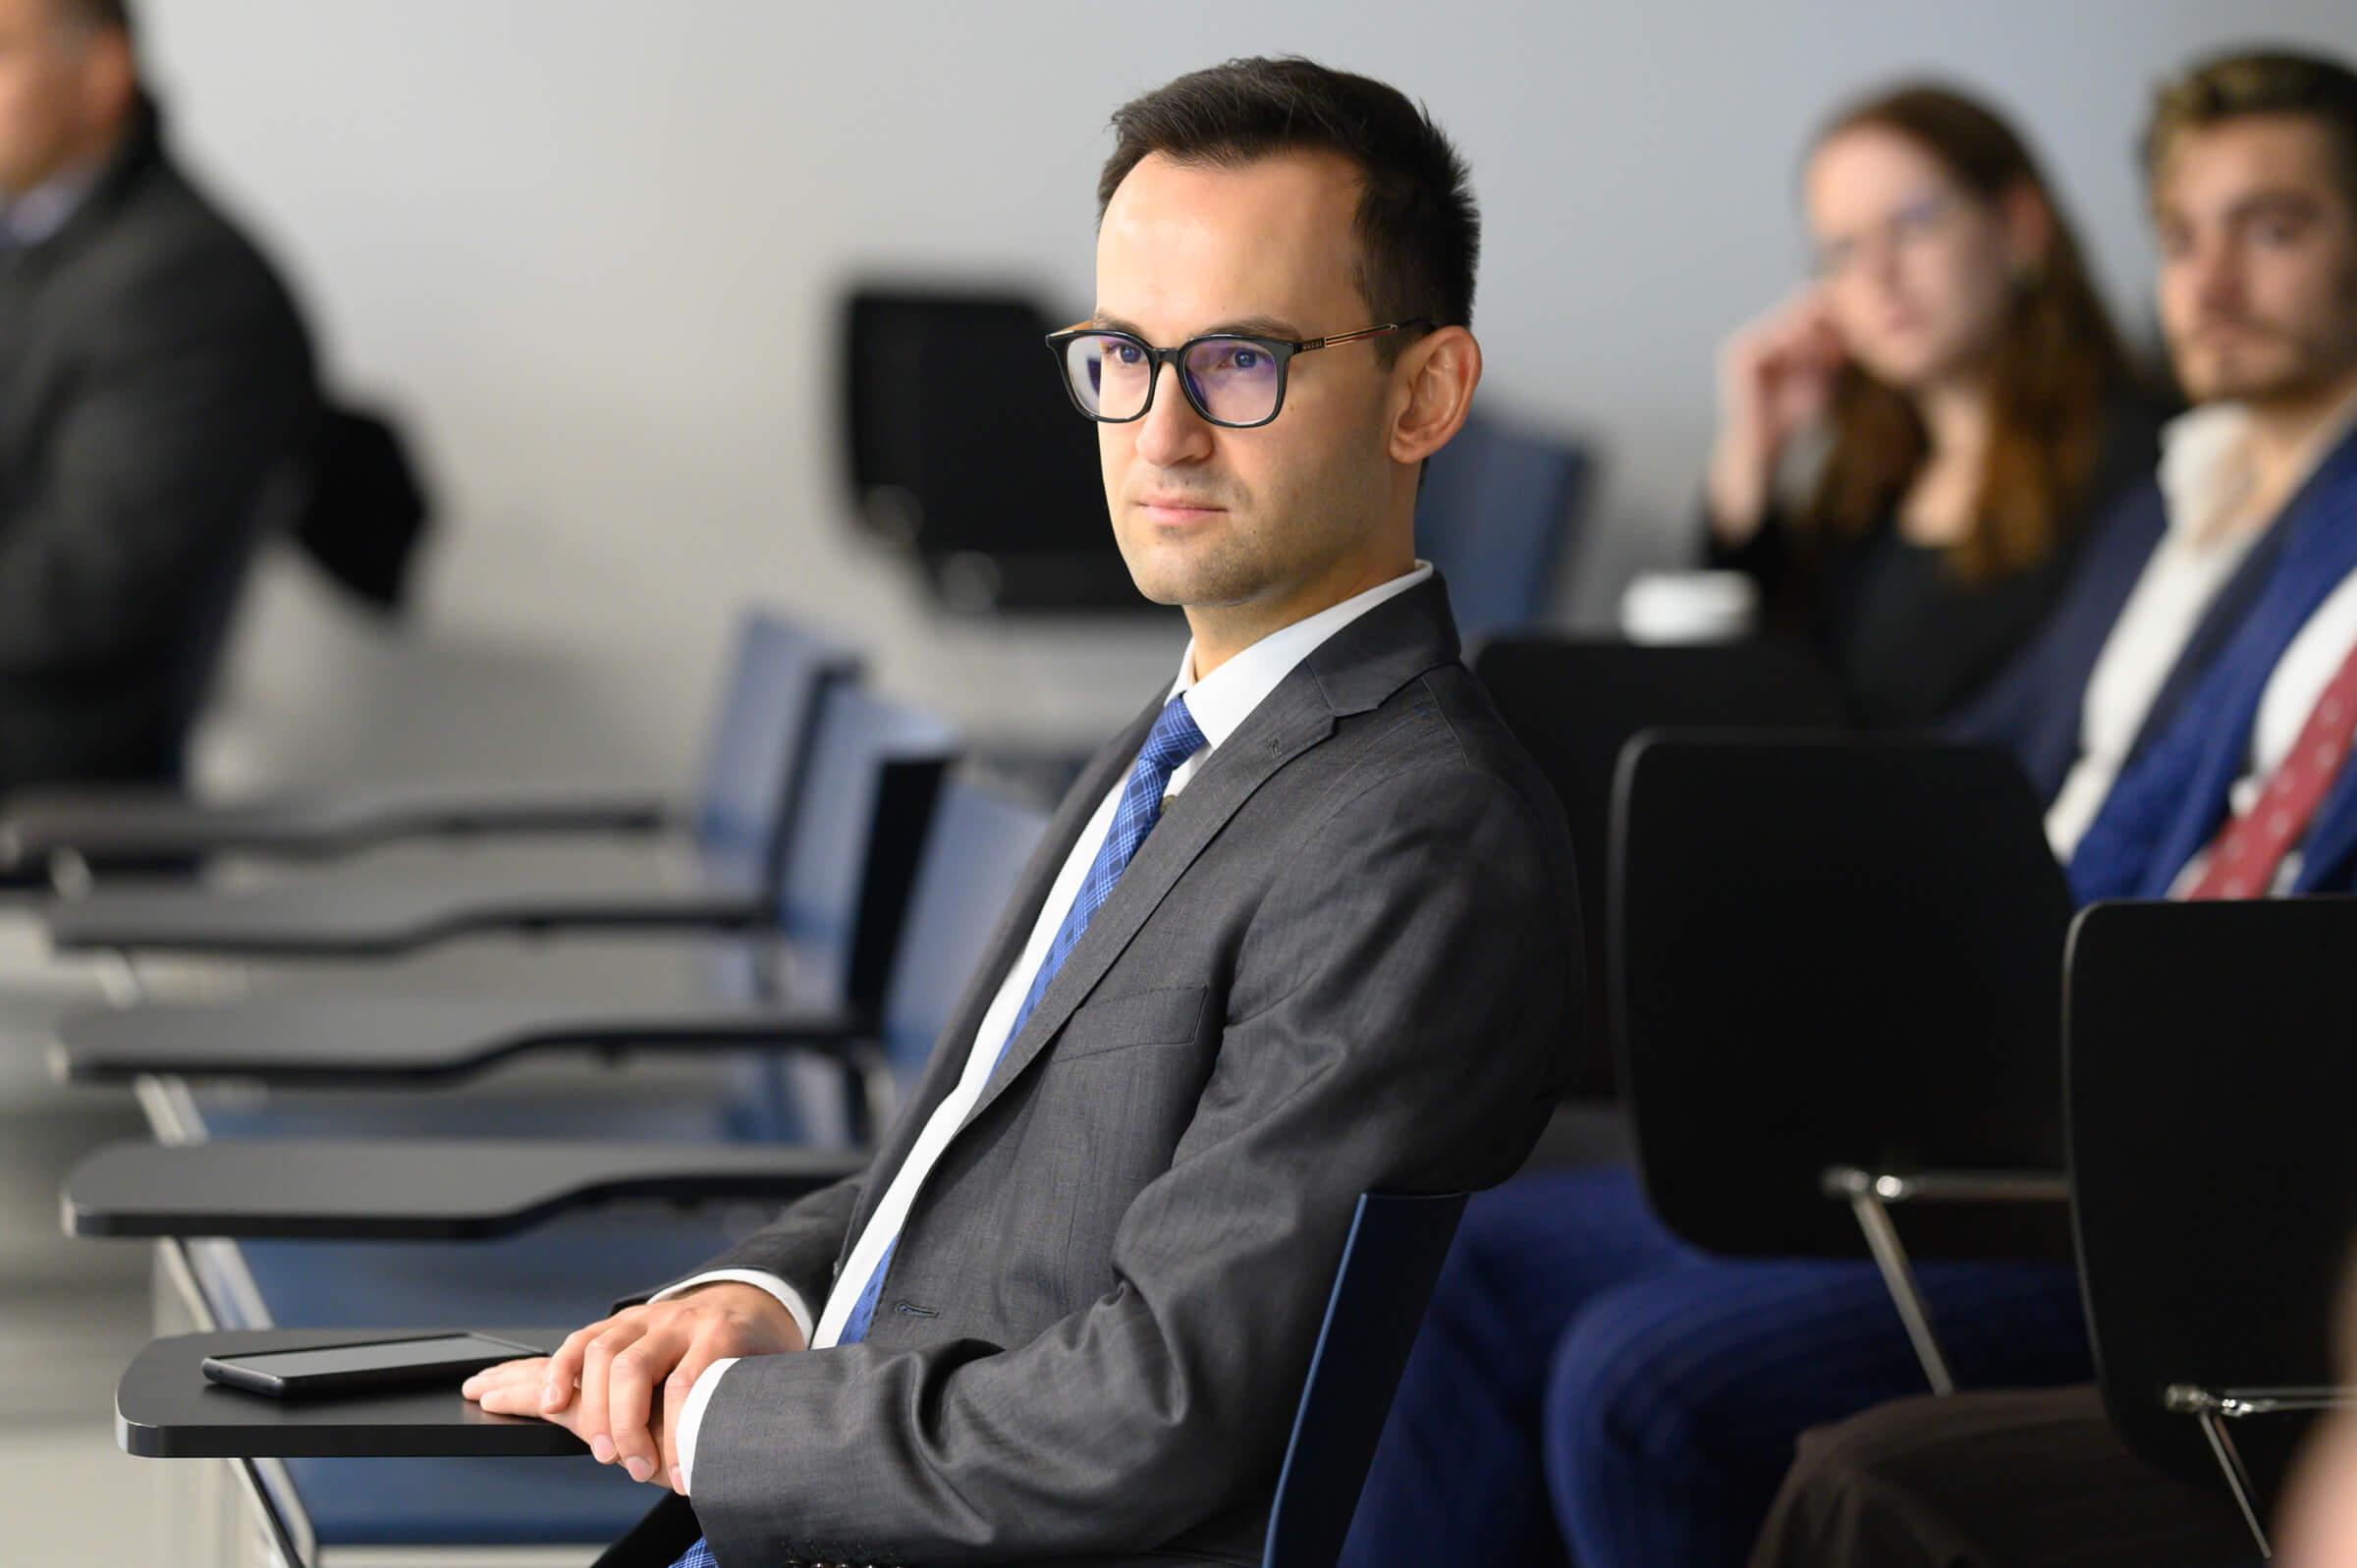 Dr. Dominik Horodyski from the Faculty of Law in Warsaw in the audience at the opening of the Vis Moot Bootcamp training at SWPS University in Warsaw.